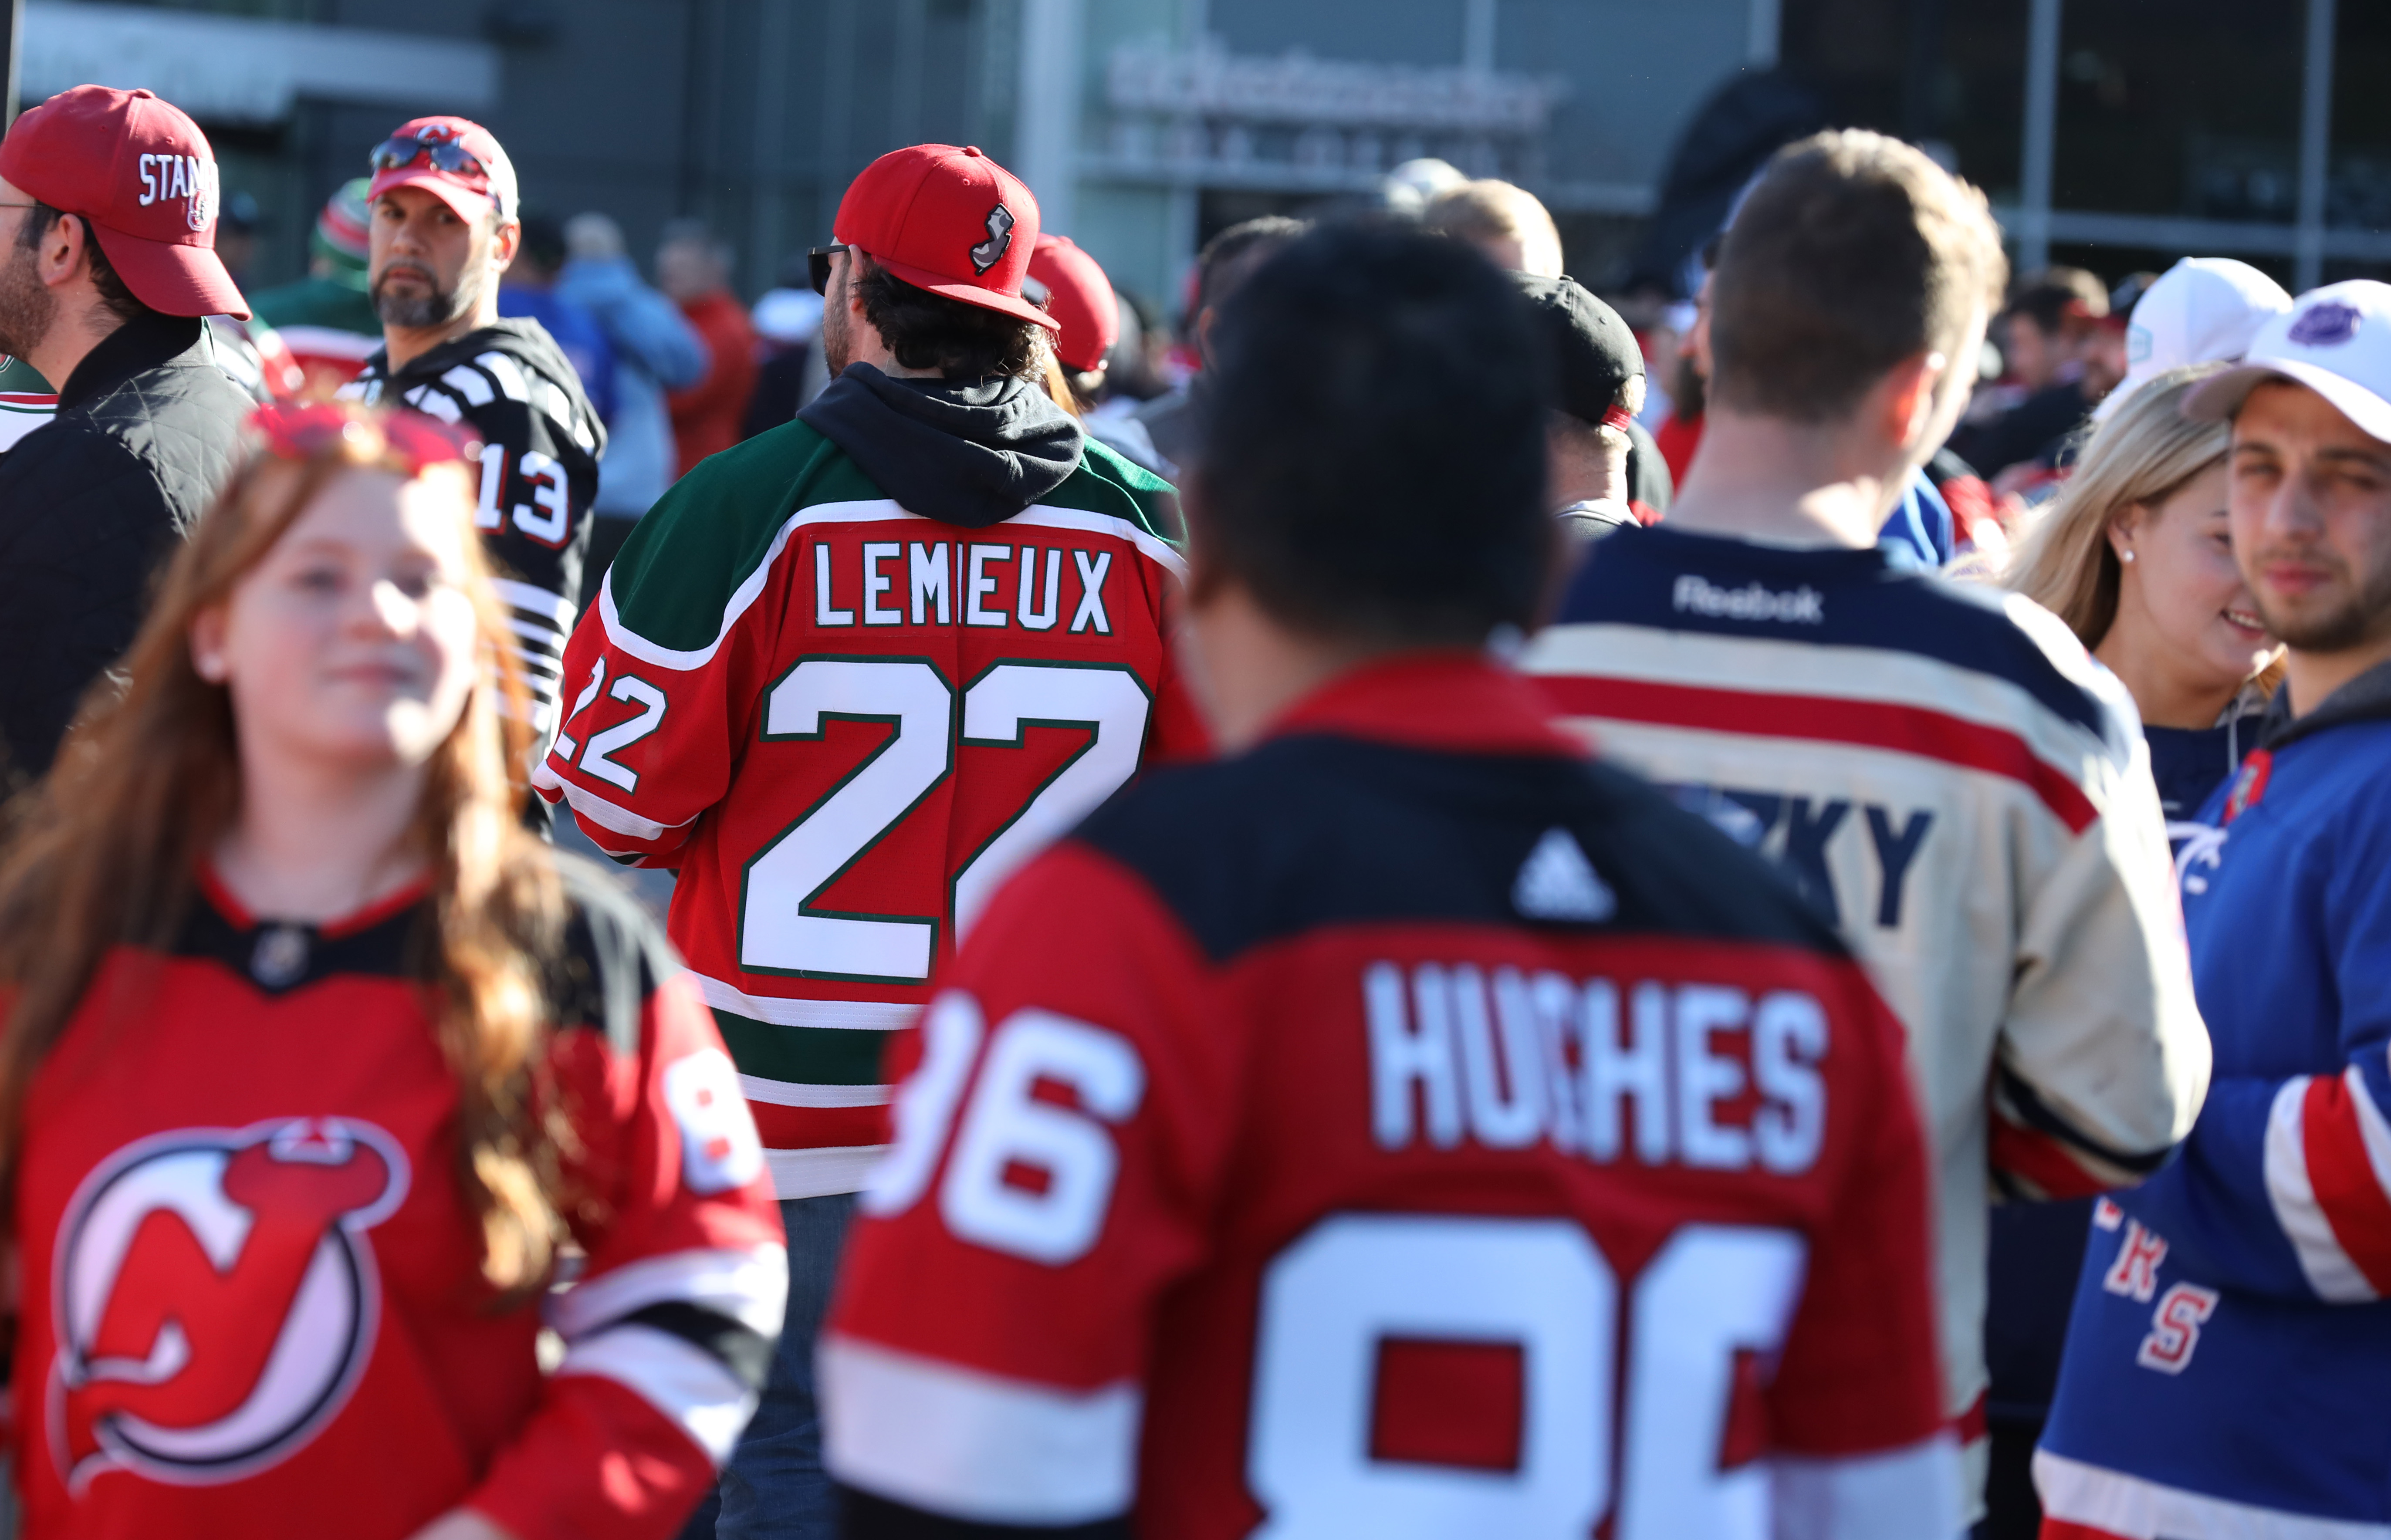 An old school Claude Lemieux jersey outside Prudential Center as the New Jersey Devils and New York Rangers play Game 1 of the opening round of the Stanley Cup playoffs on Tuesday, April 18, 2023 in Newark, N.J. 